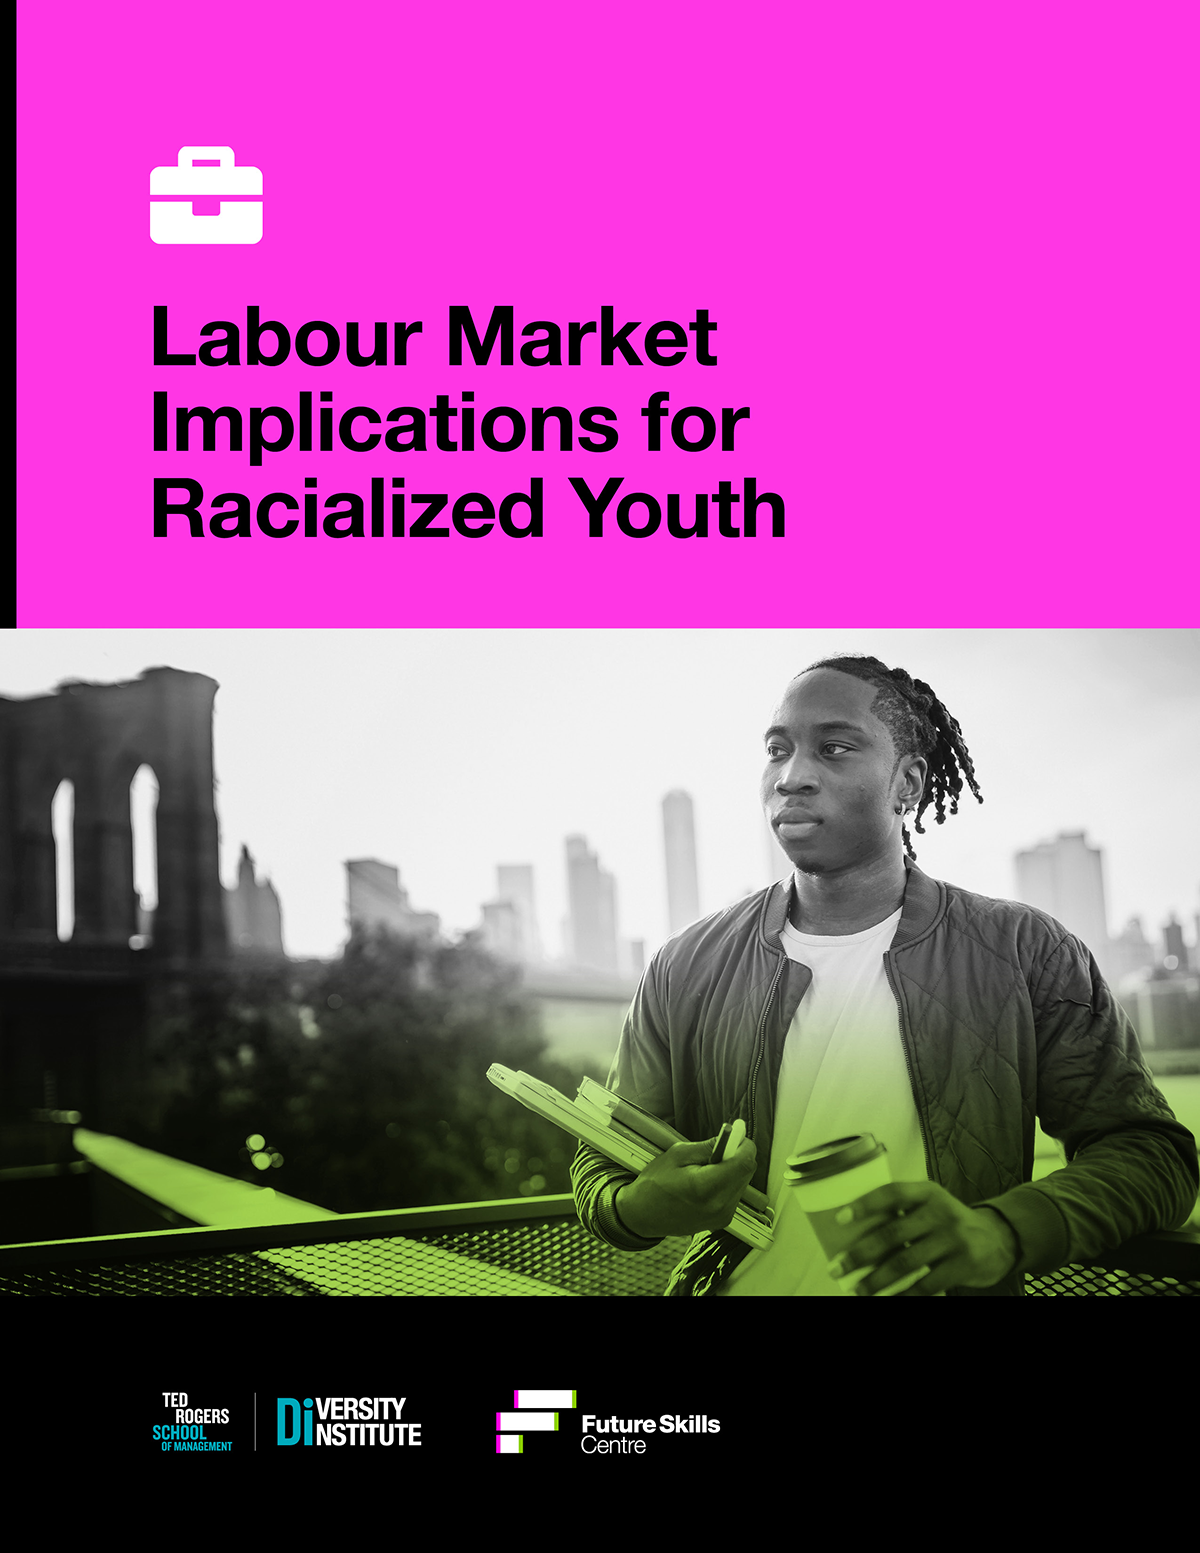 Labour Market Implications for Racialized Youth